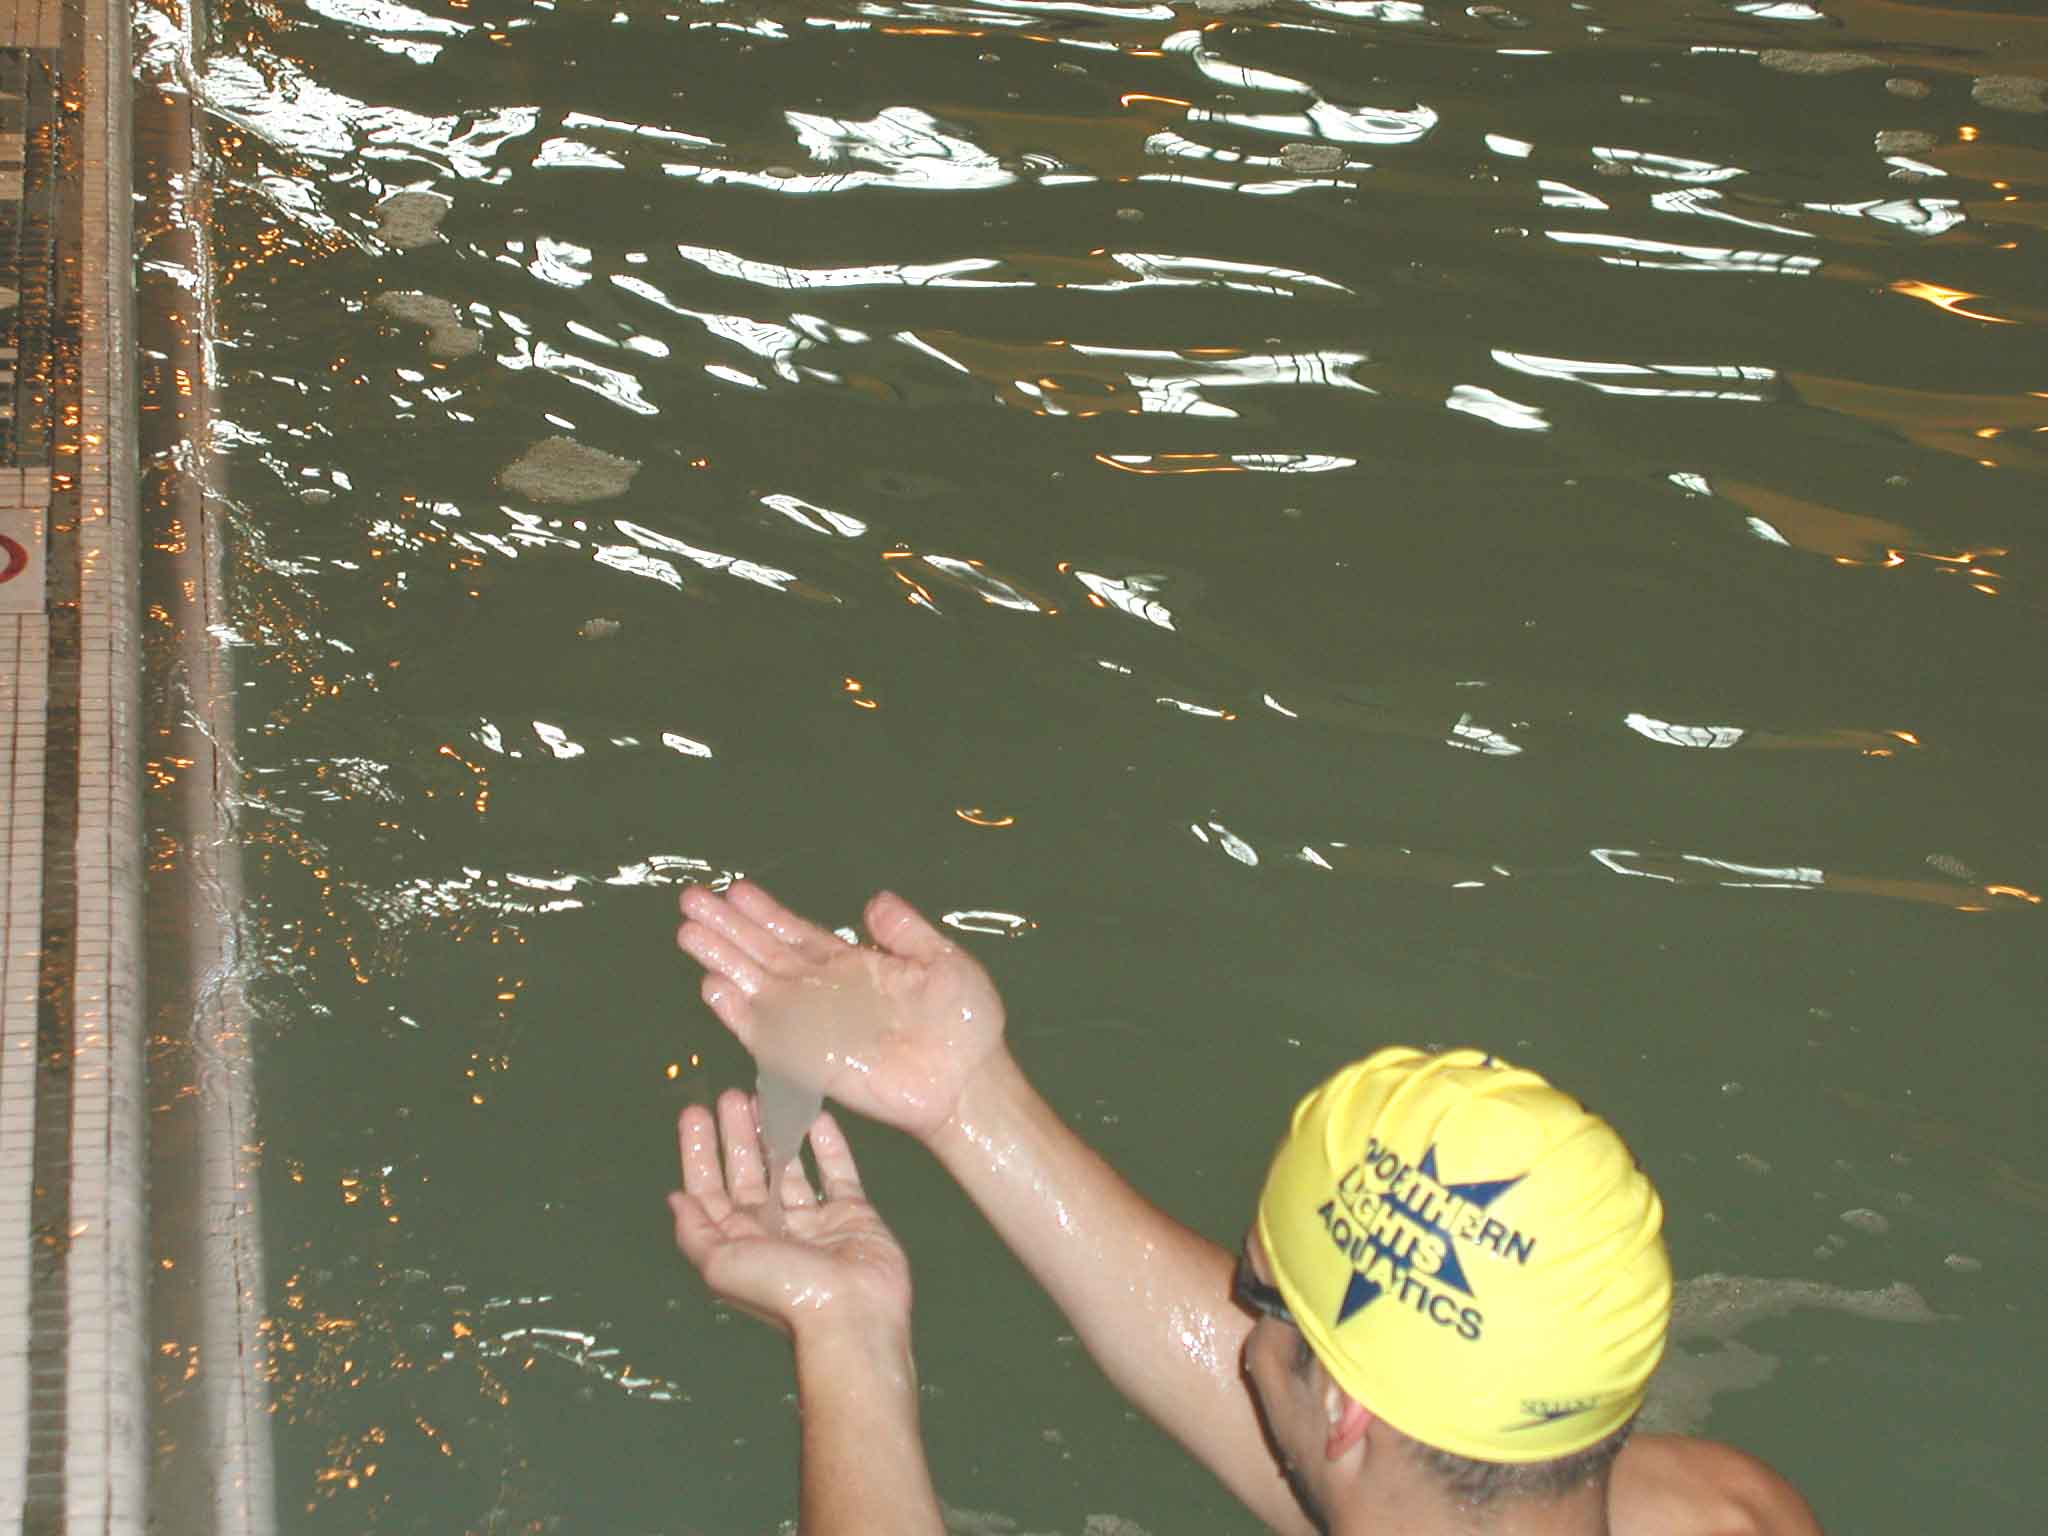 One of the swimmers handles the goo